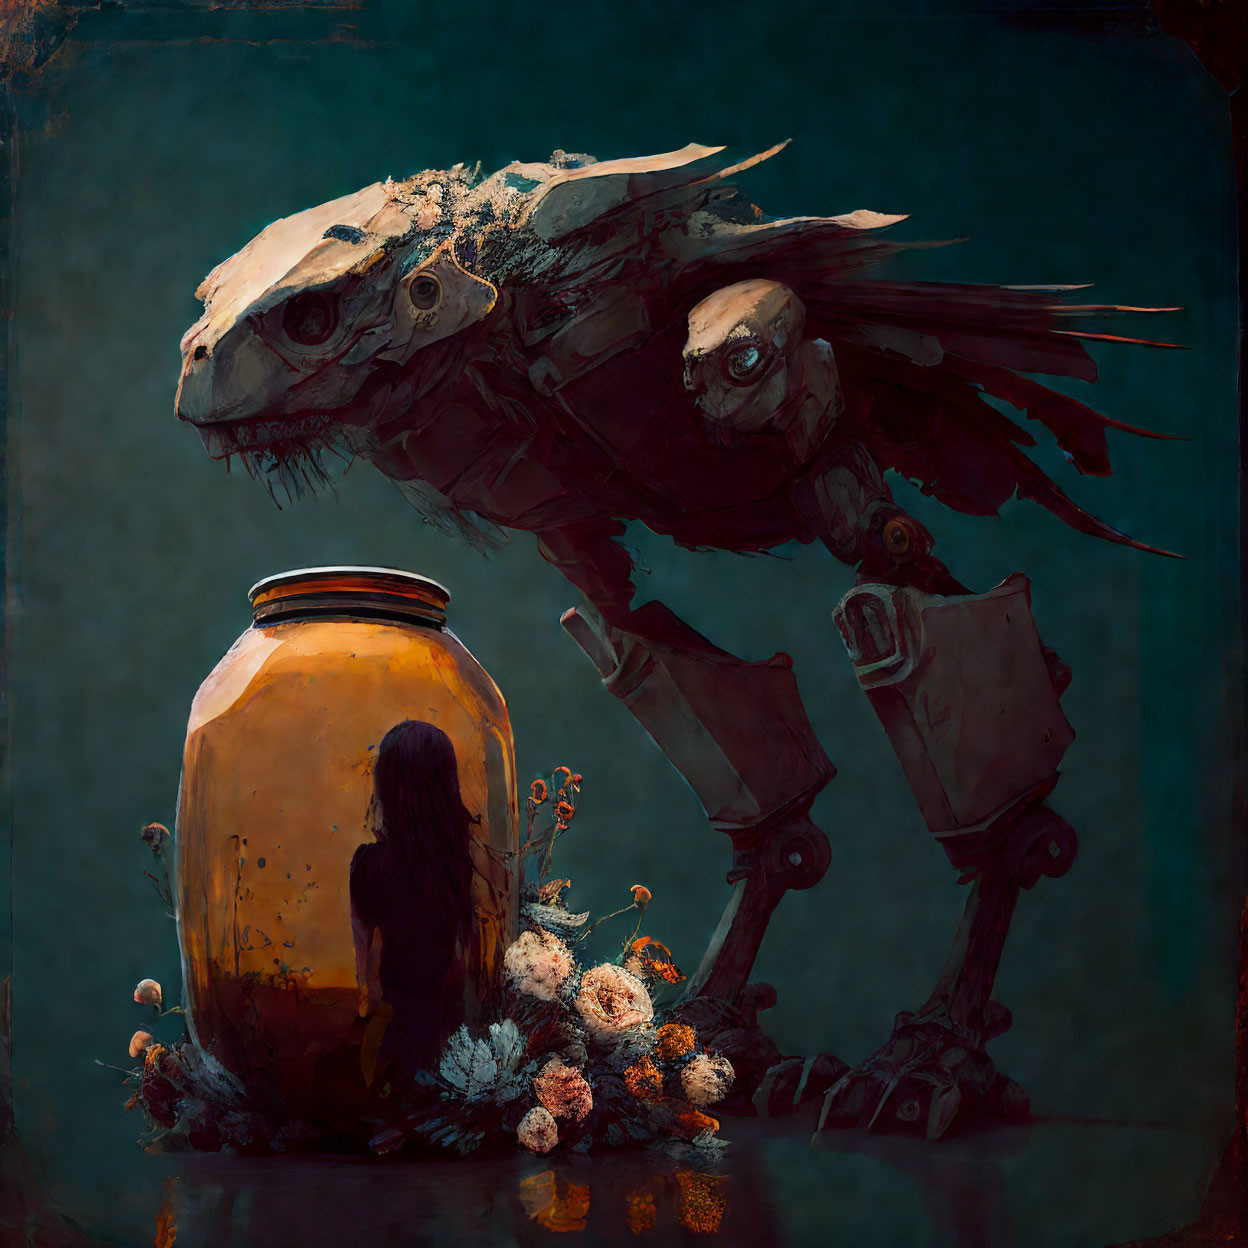 Fantastical artwork of skull-headed creature and small figure in jar with flowers